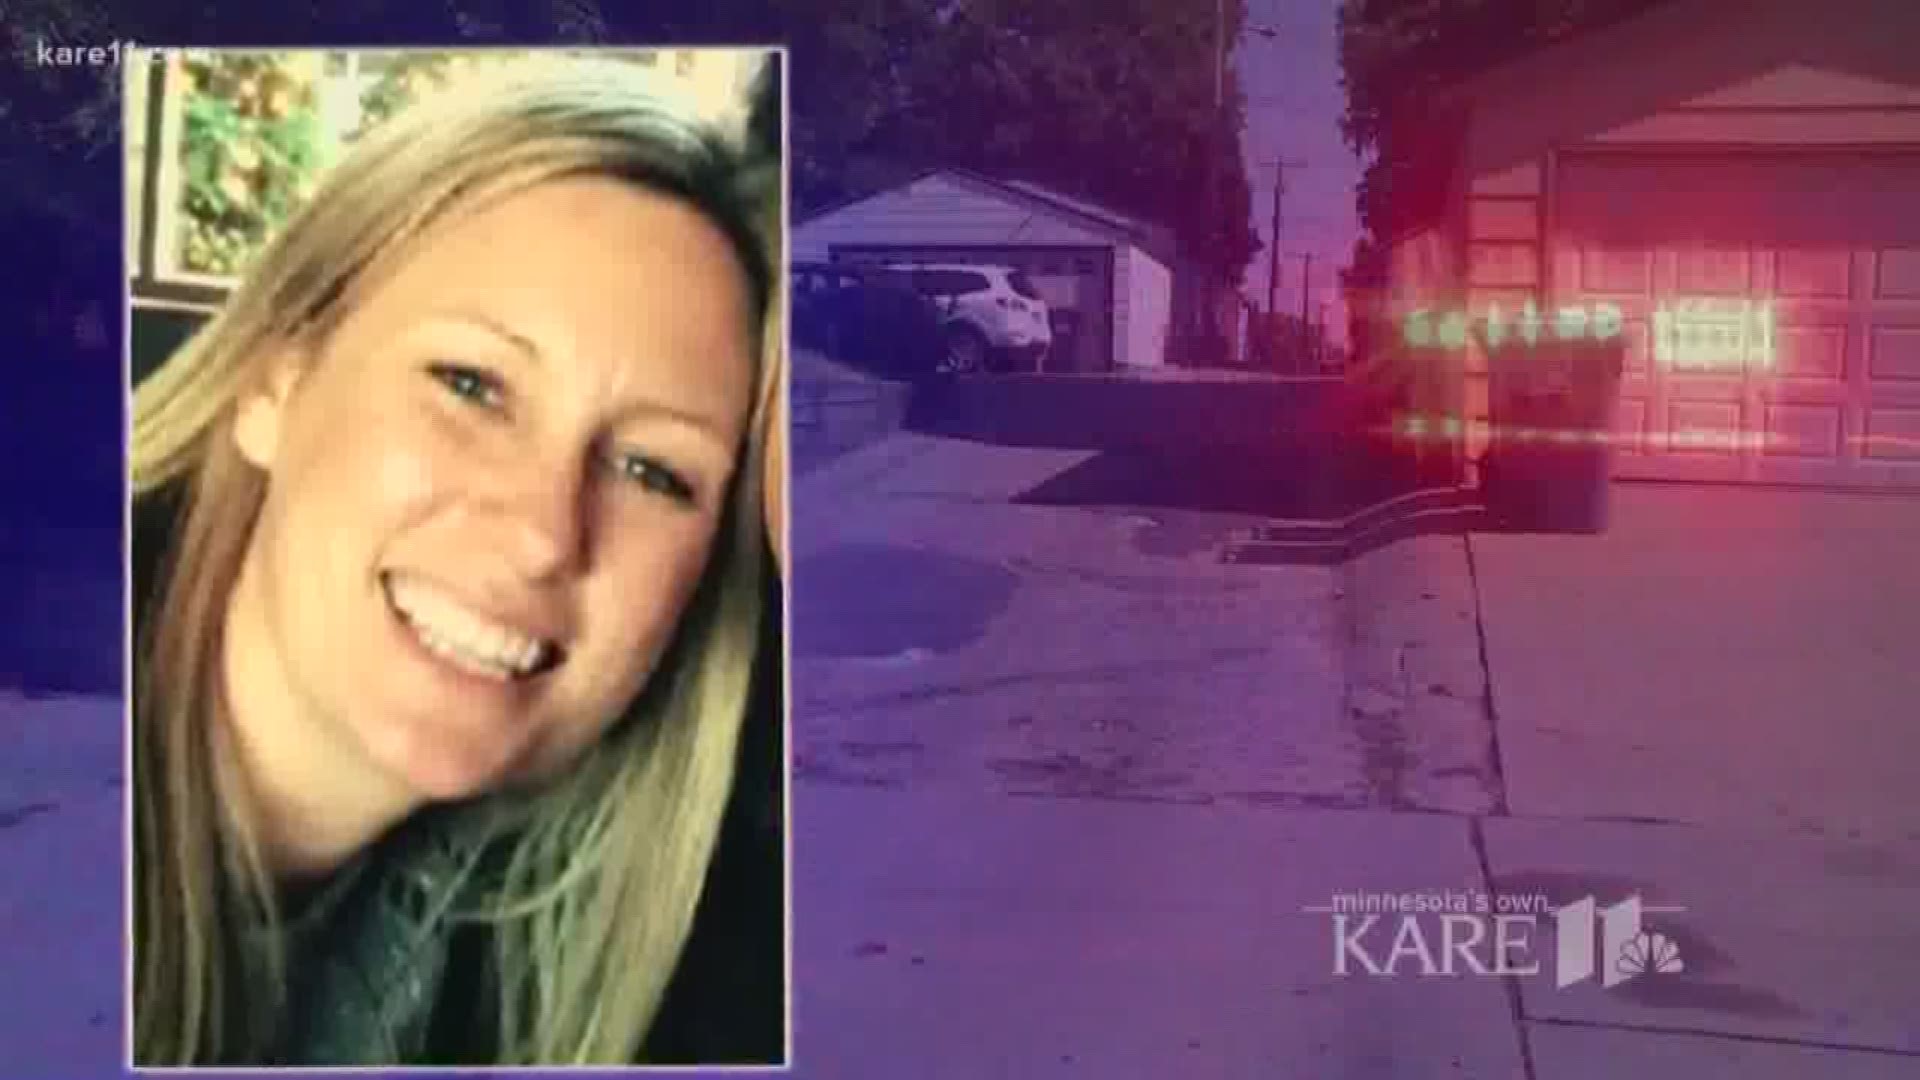 A timeline of events related to the officer-involved shooting death of Justine Damond. http://kare11.tv/2DFyeAP